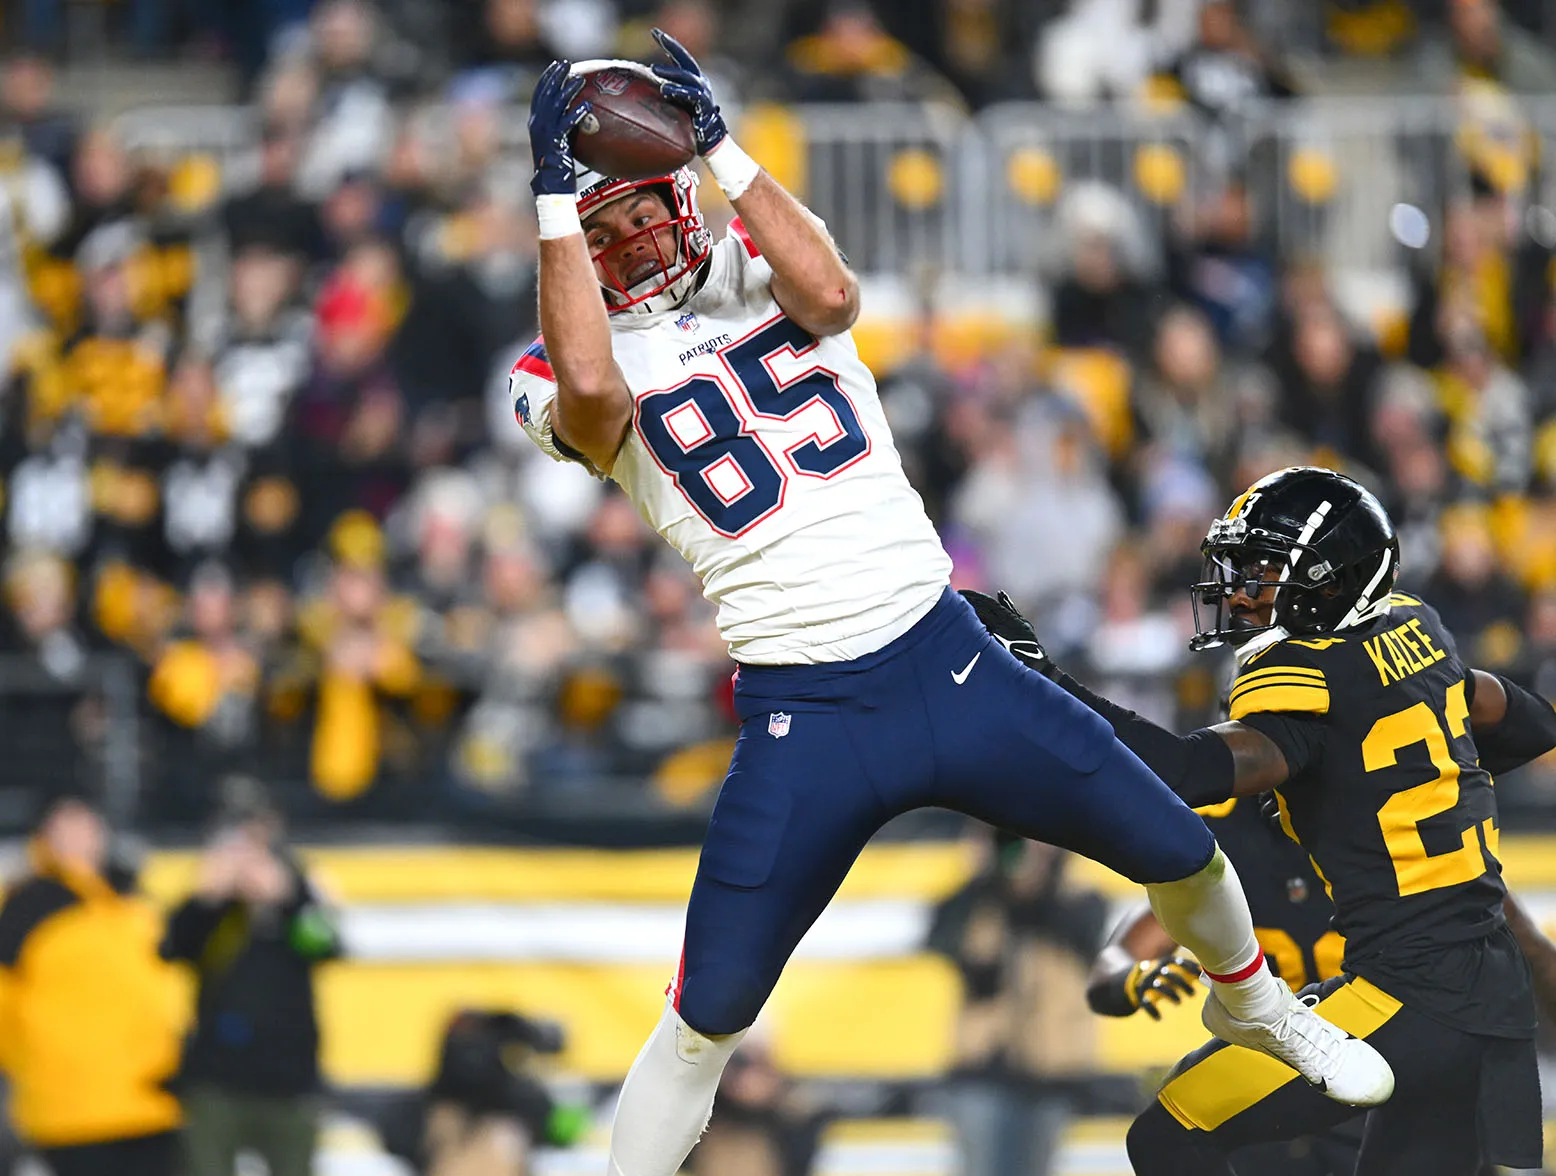 PITTSBURGH, PENNSYLVANIA - DECEMBER 07: Tight end Hunter Henry (85) of the New England Patriots catches a touchdown in the second quarter against the Pittsburgh Steelers at Acrisure Stadium on December 07, 2023 in Pittsburgh, Pennsylvania. (Photo by Joe Sargent/Getty Images)